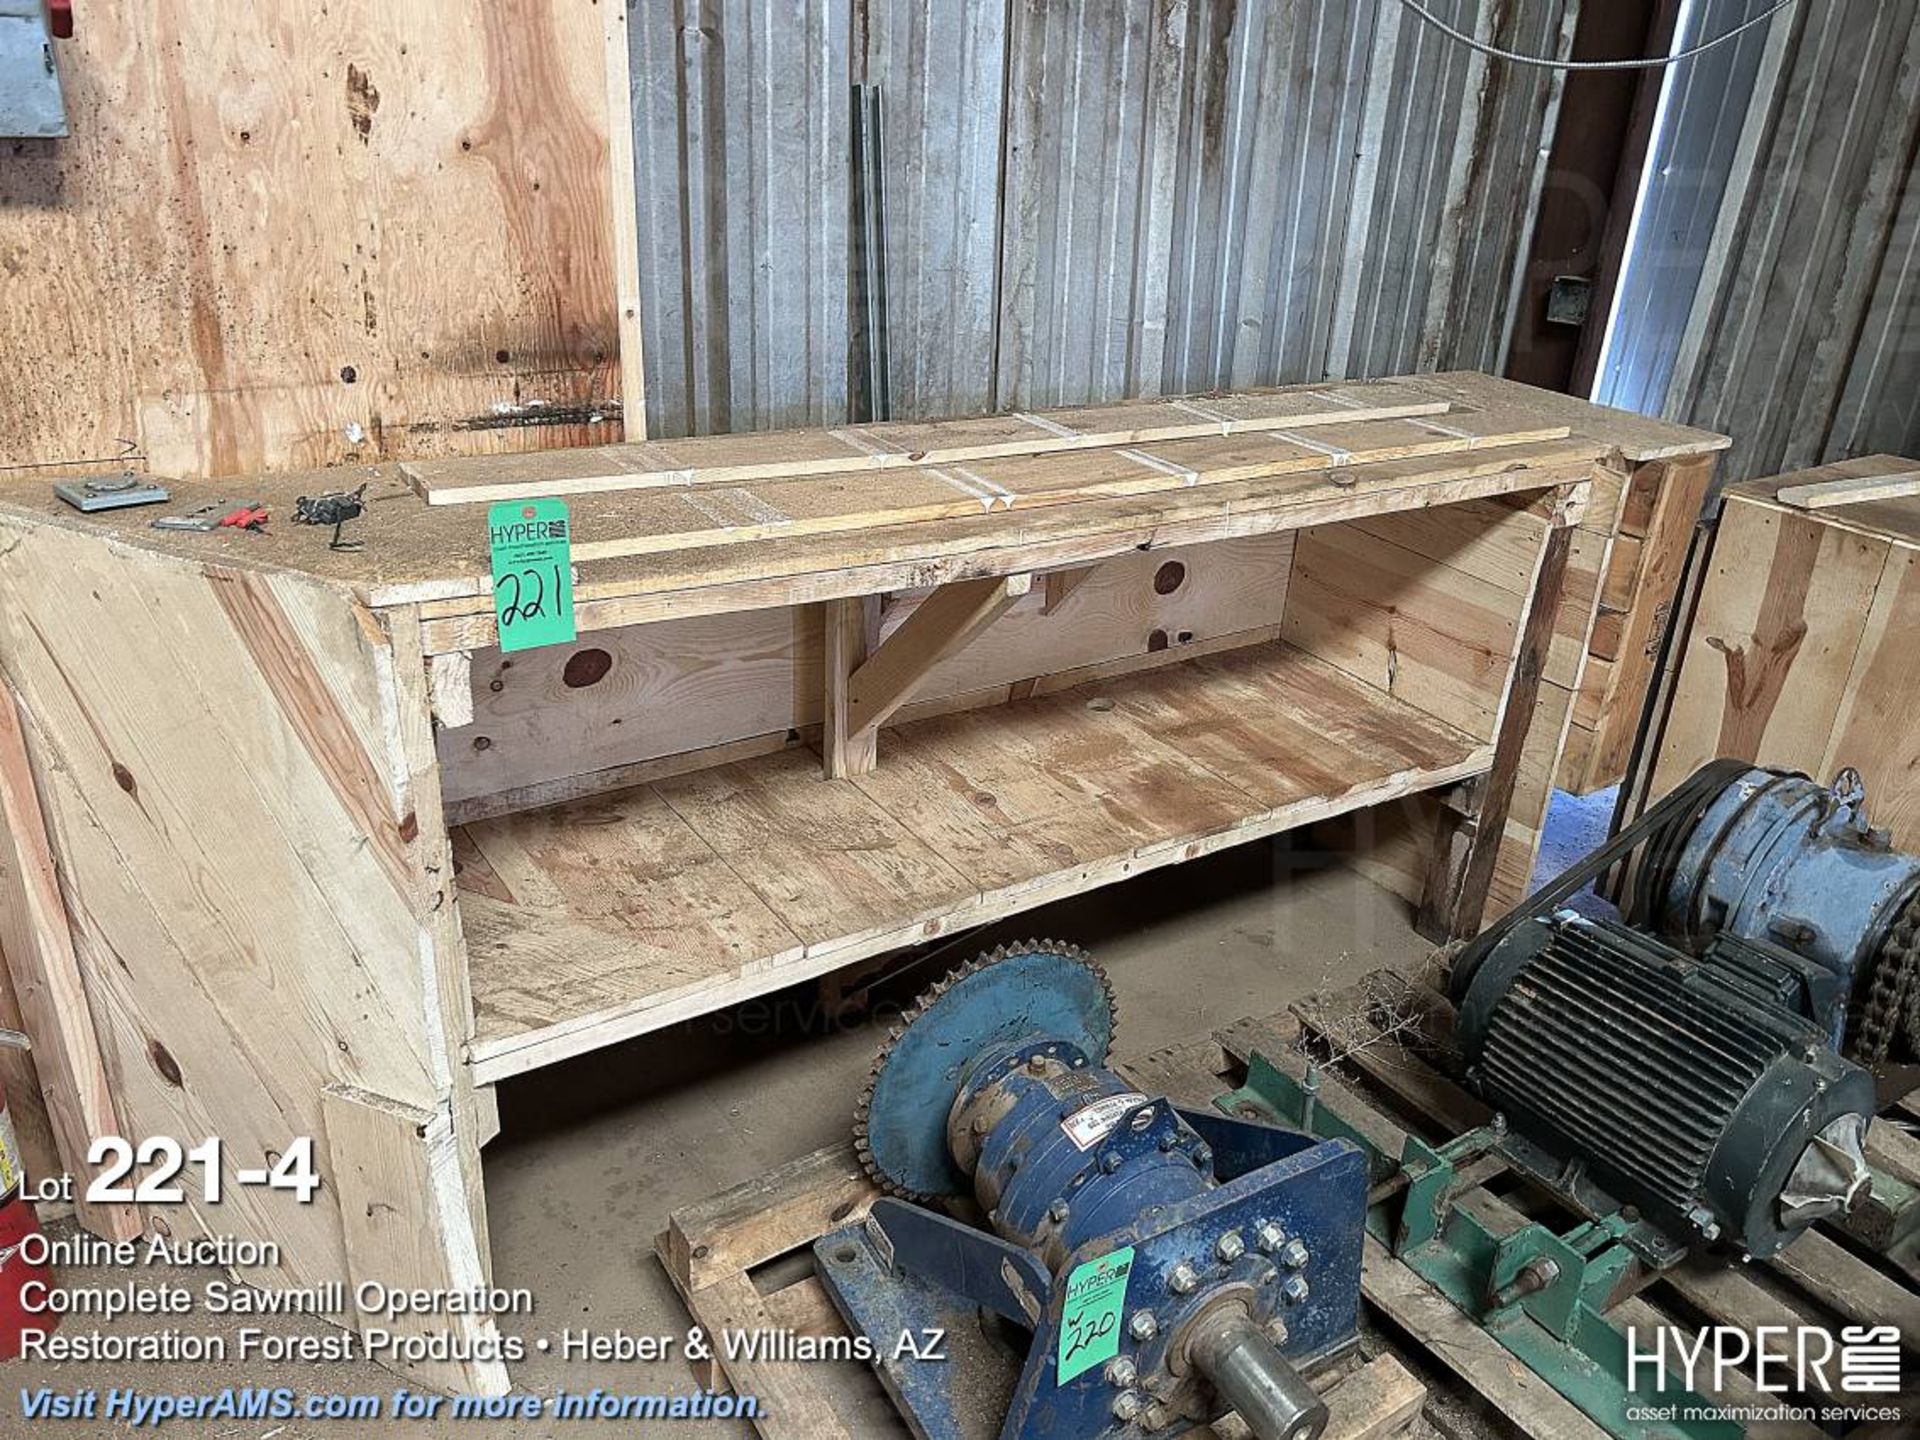 Lot: Wood shelves, cabinet, table, chairs, and microwave - Image 4 of 4